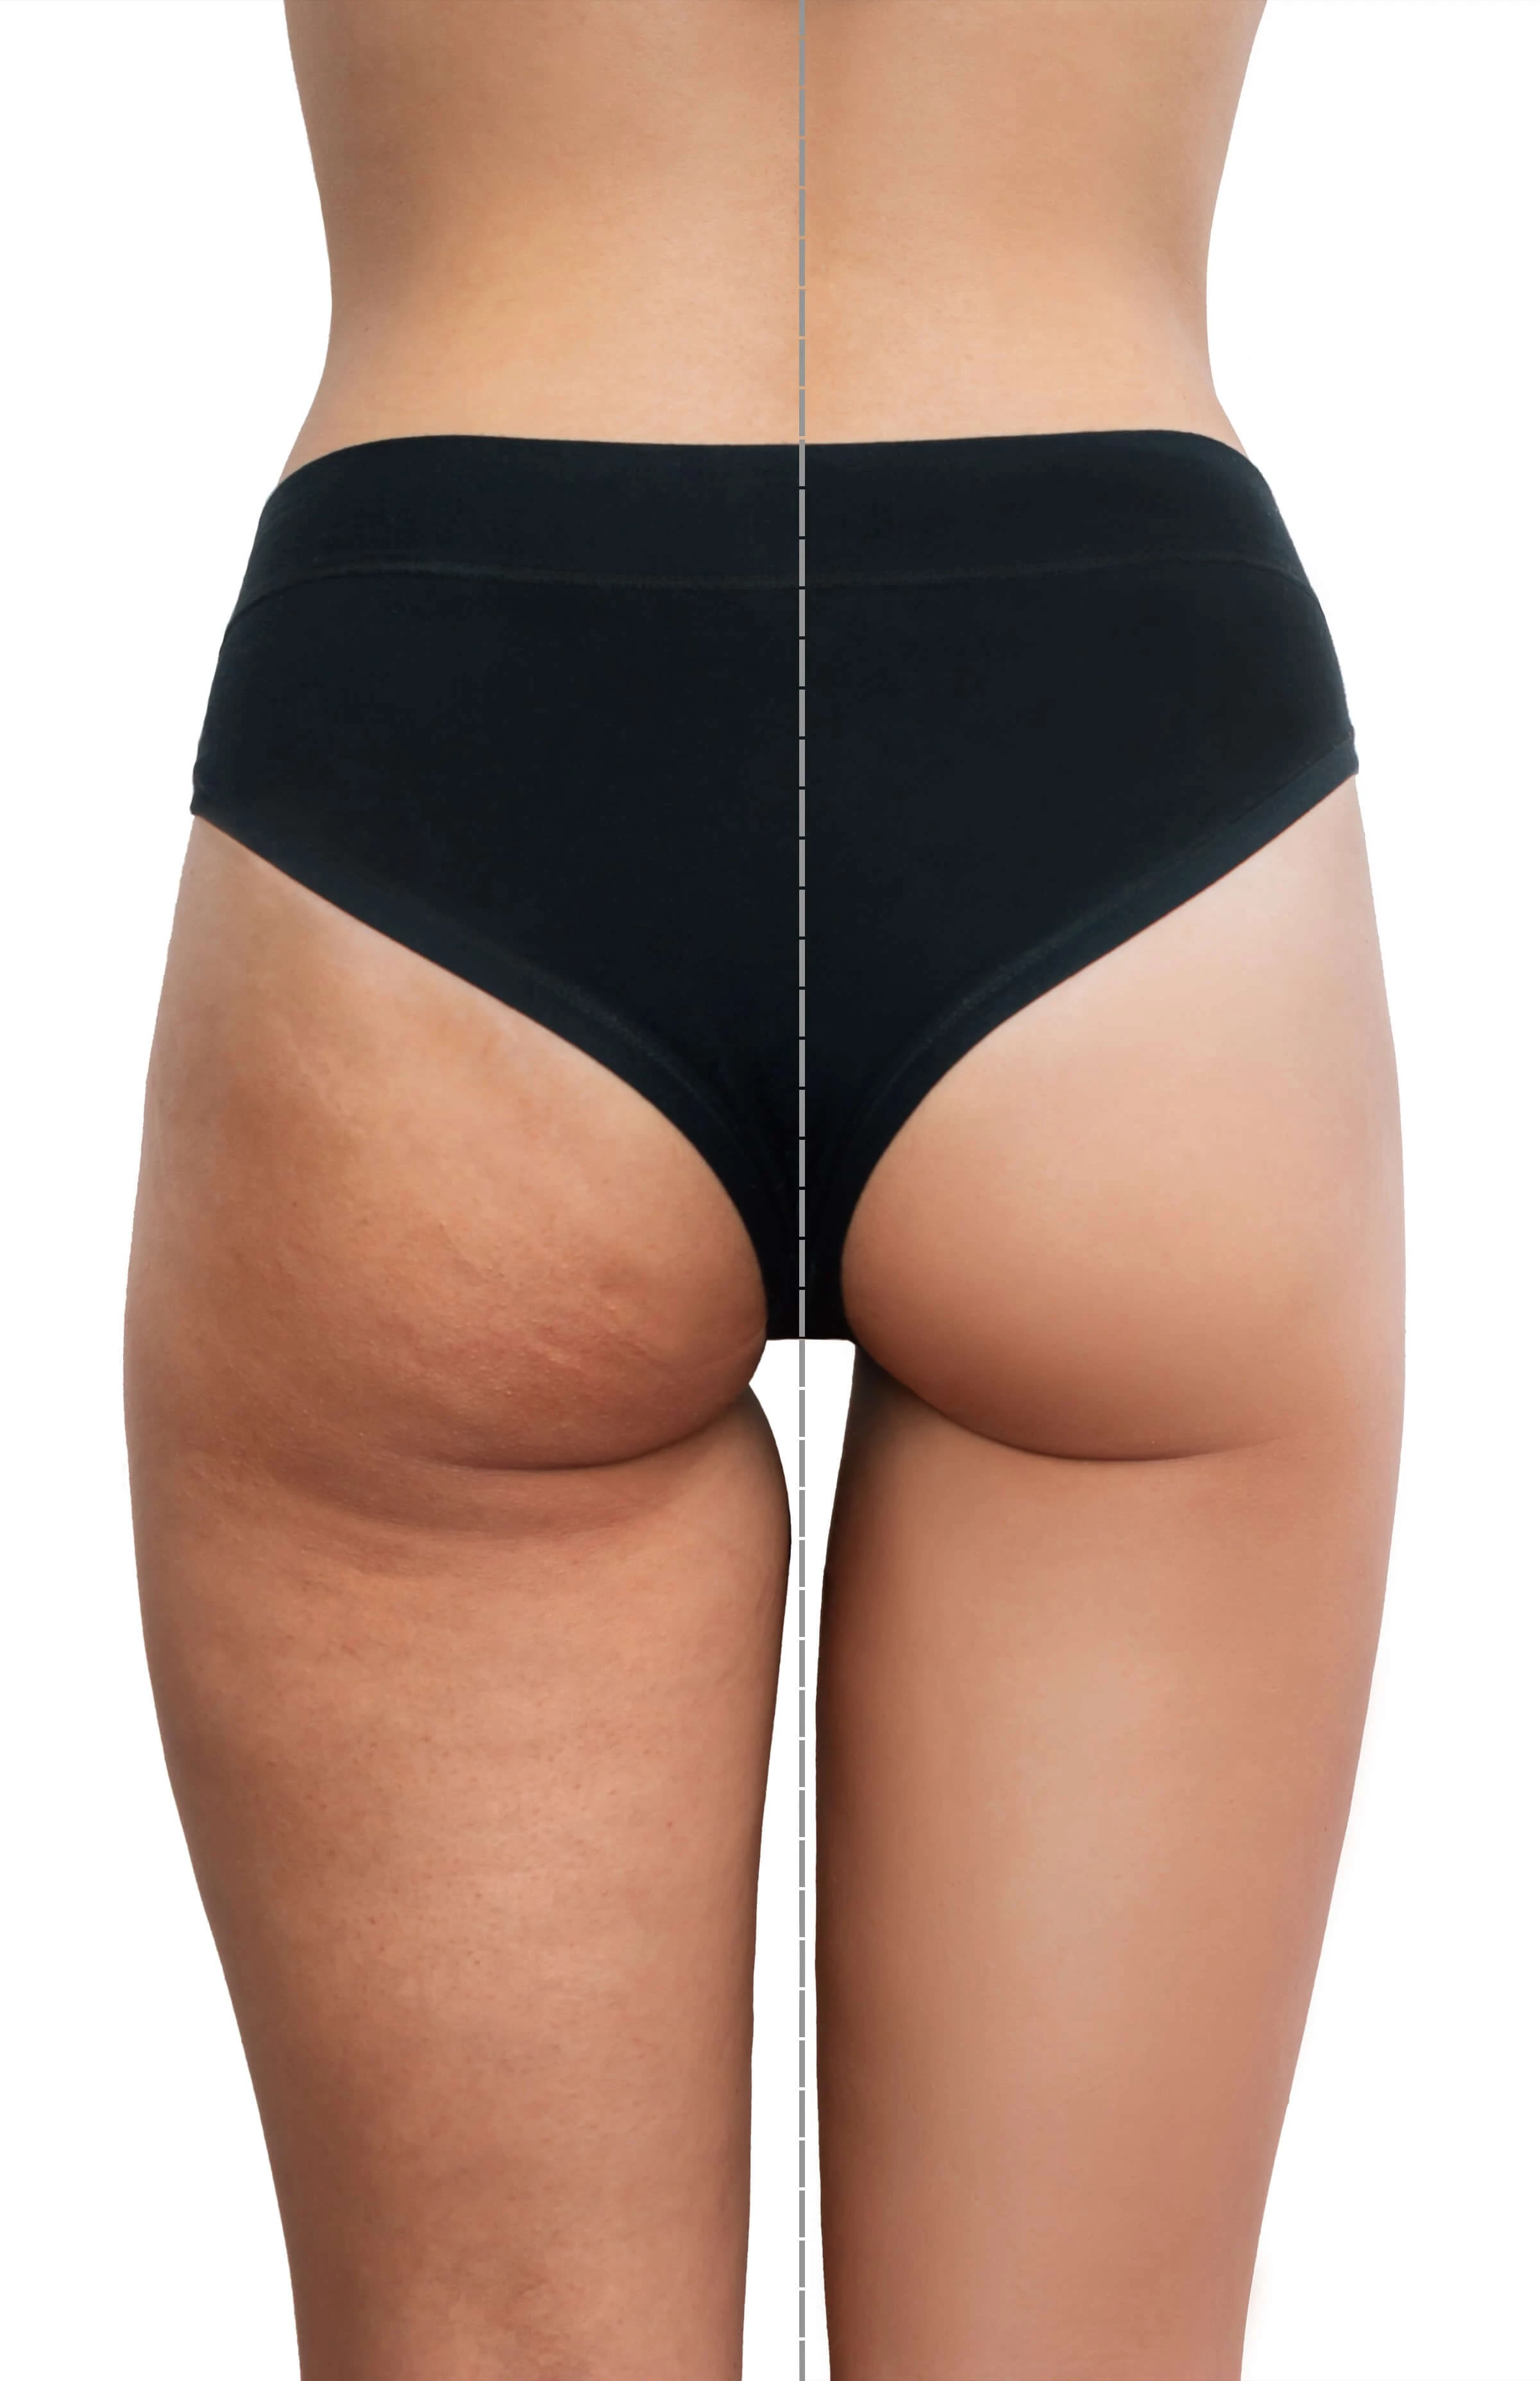 1414-comparison-young-woman-s-thighs-buttocks-with-cellulite-before-after-treatment-16979066053722.jpg